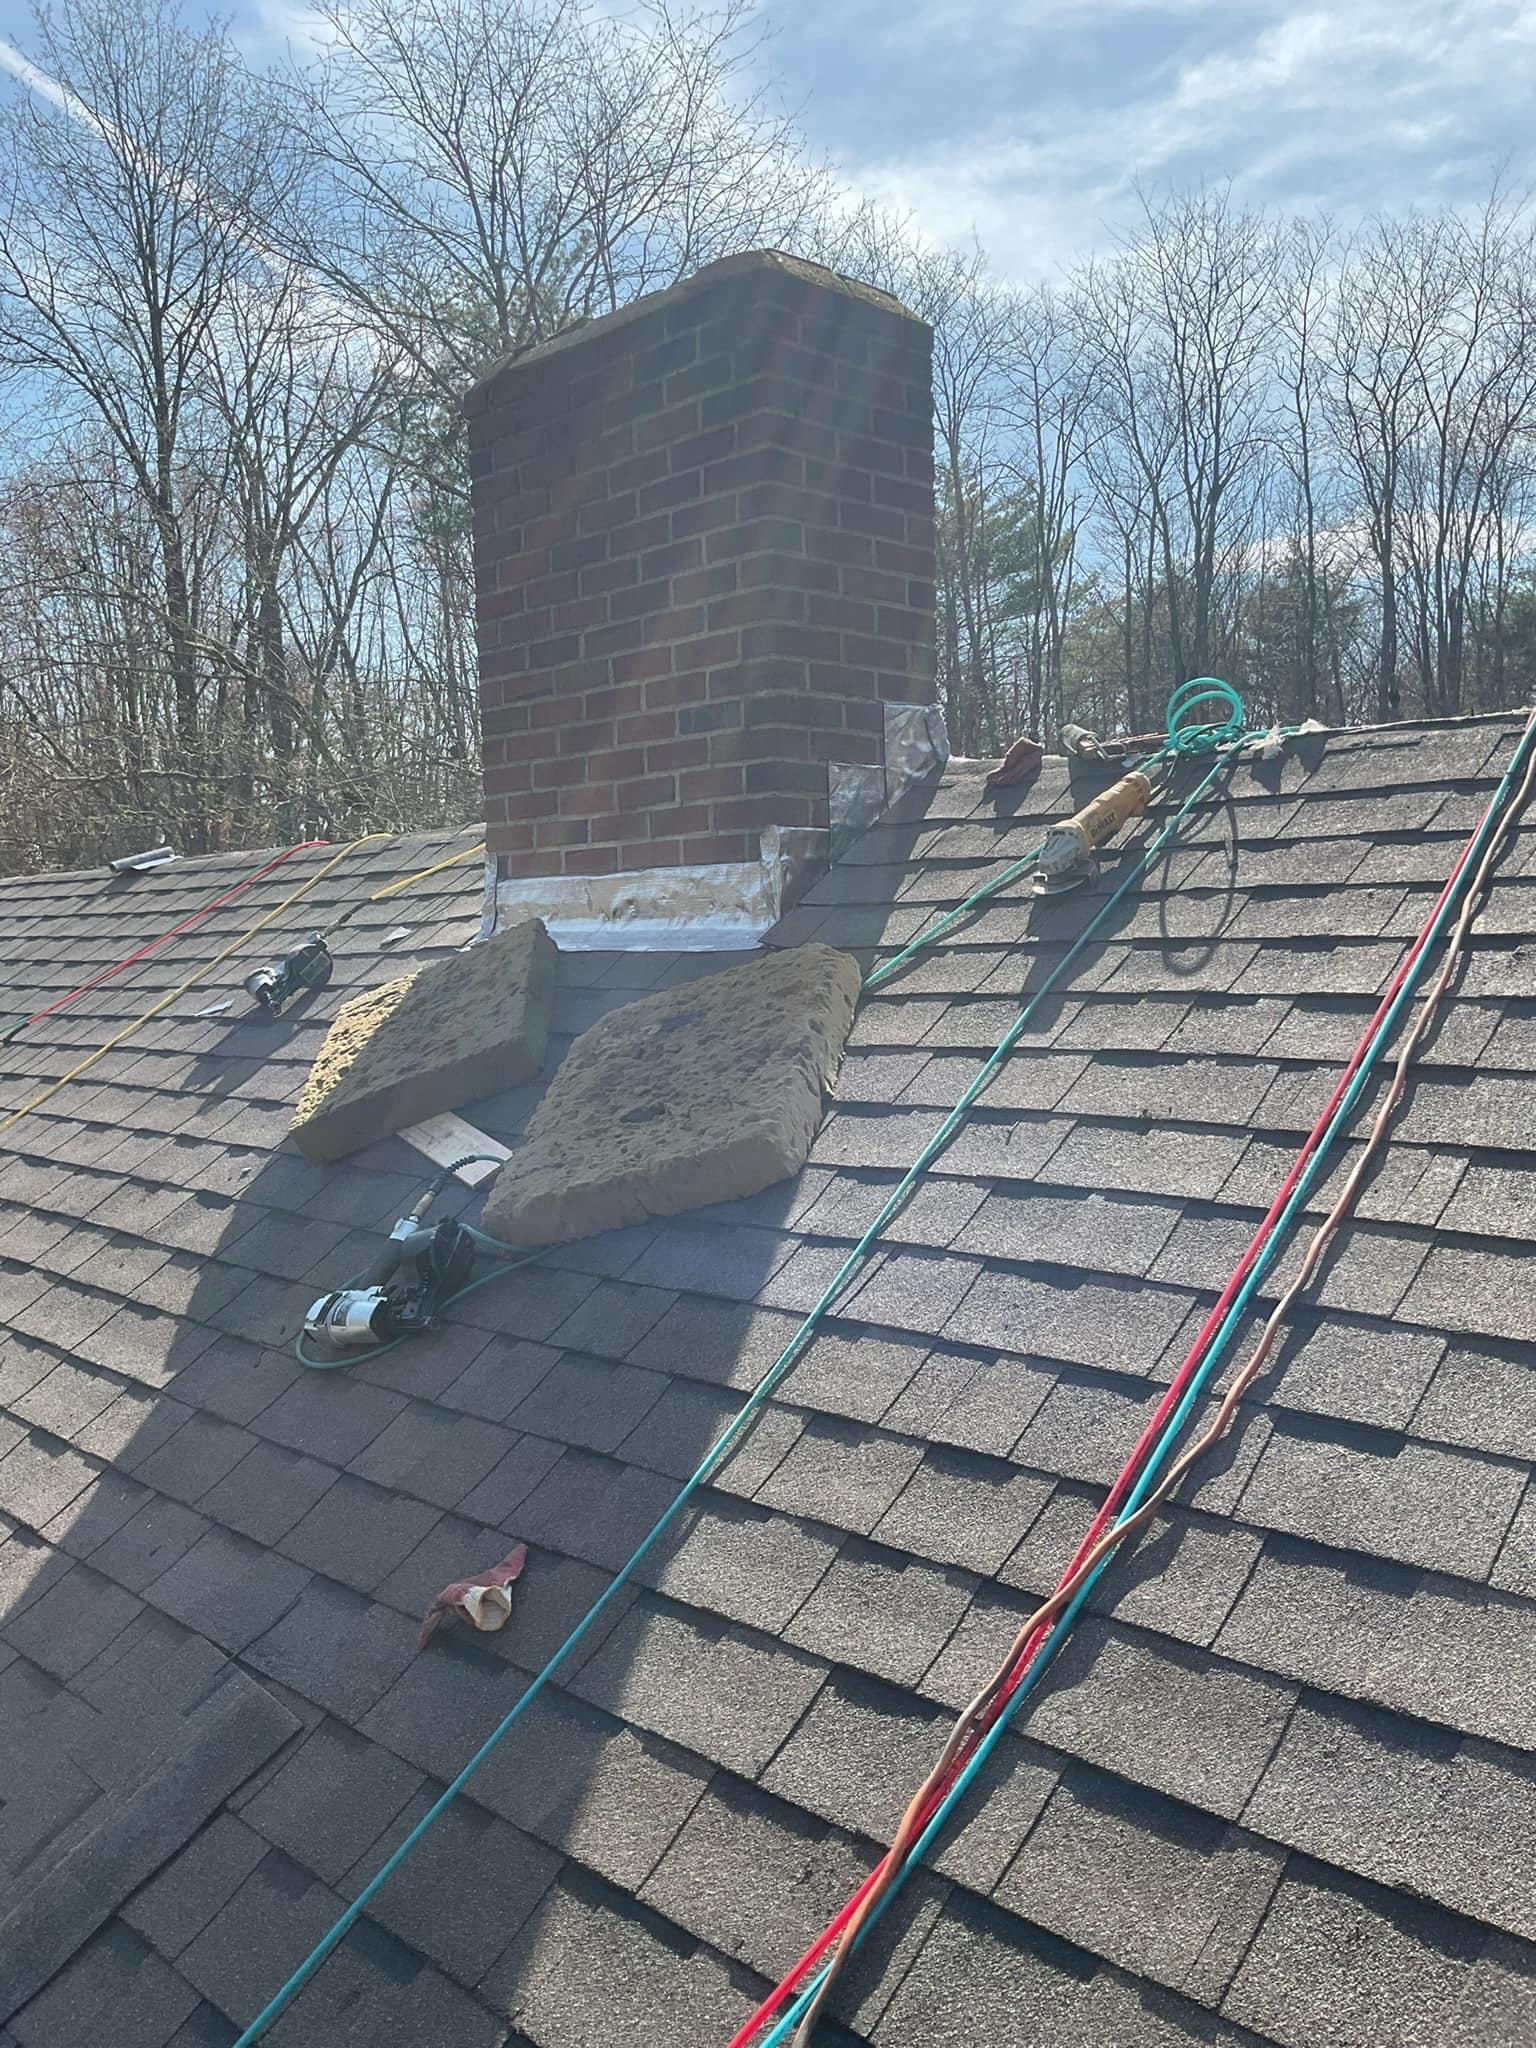 Roofing for All Around Roofing And Construction in Townsend, MA